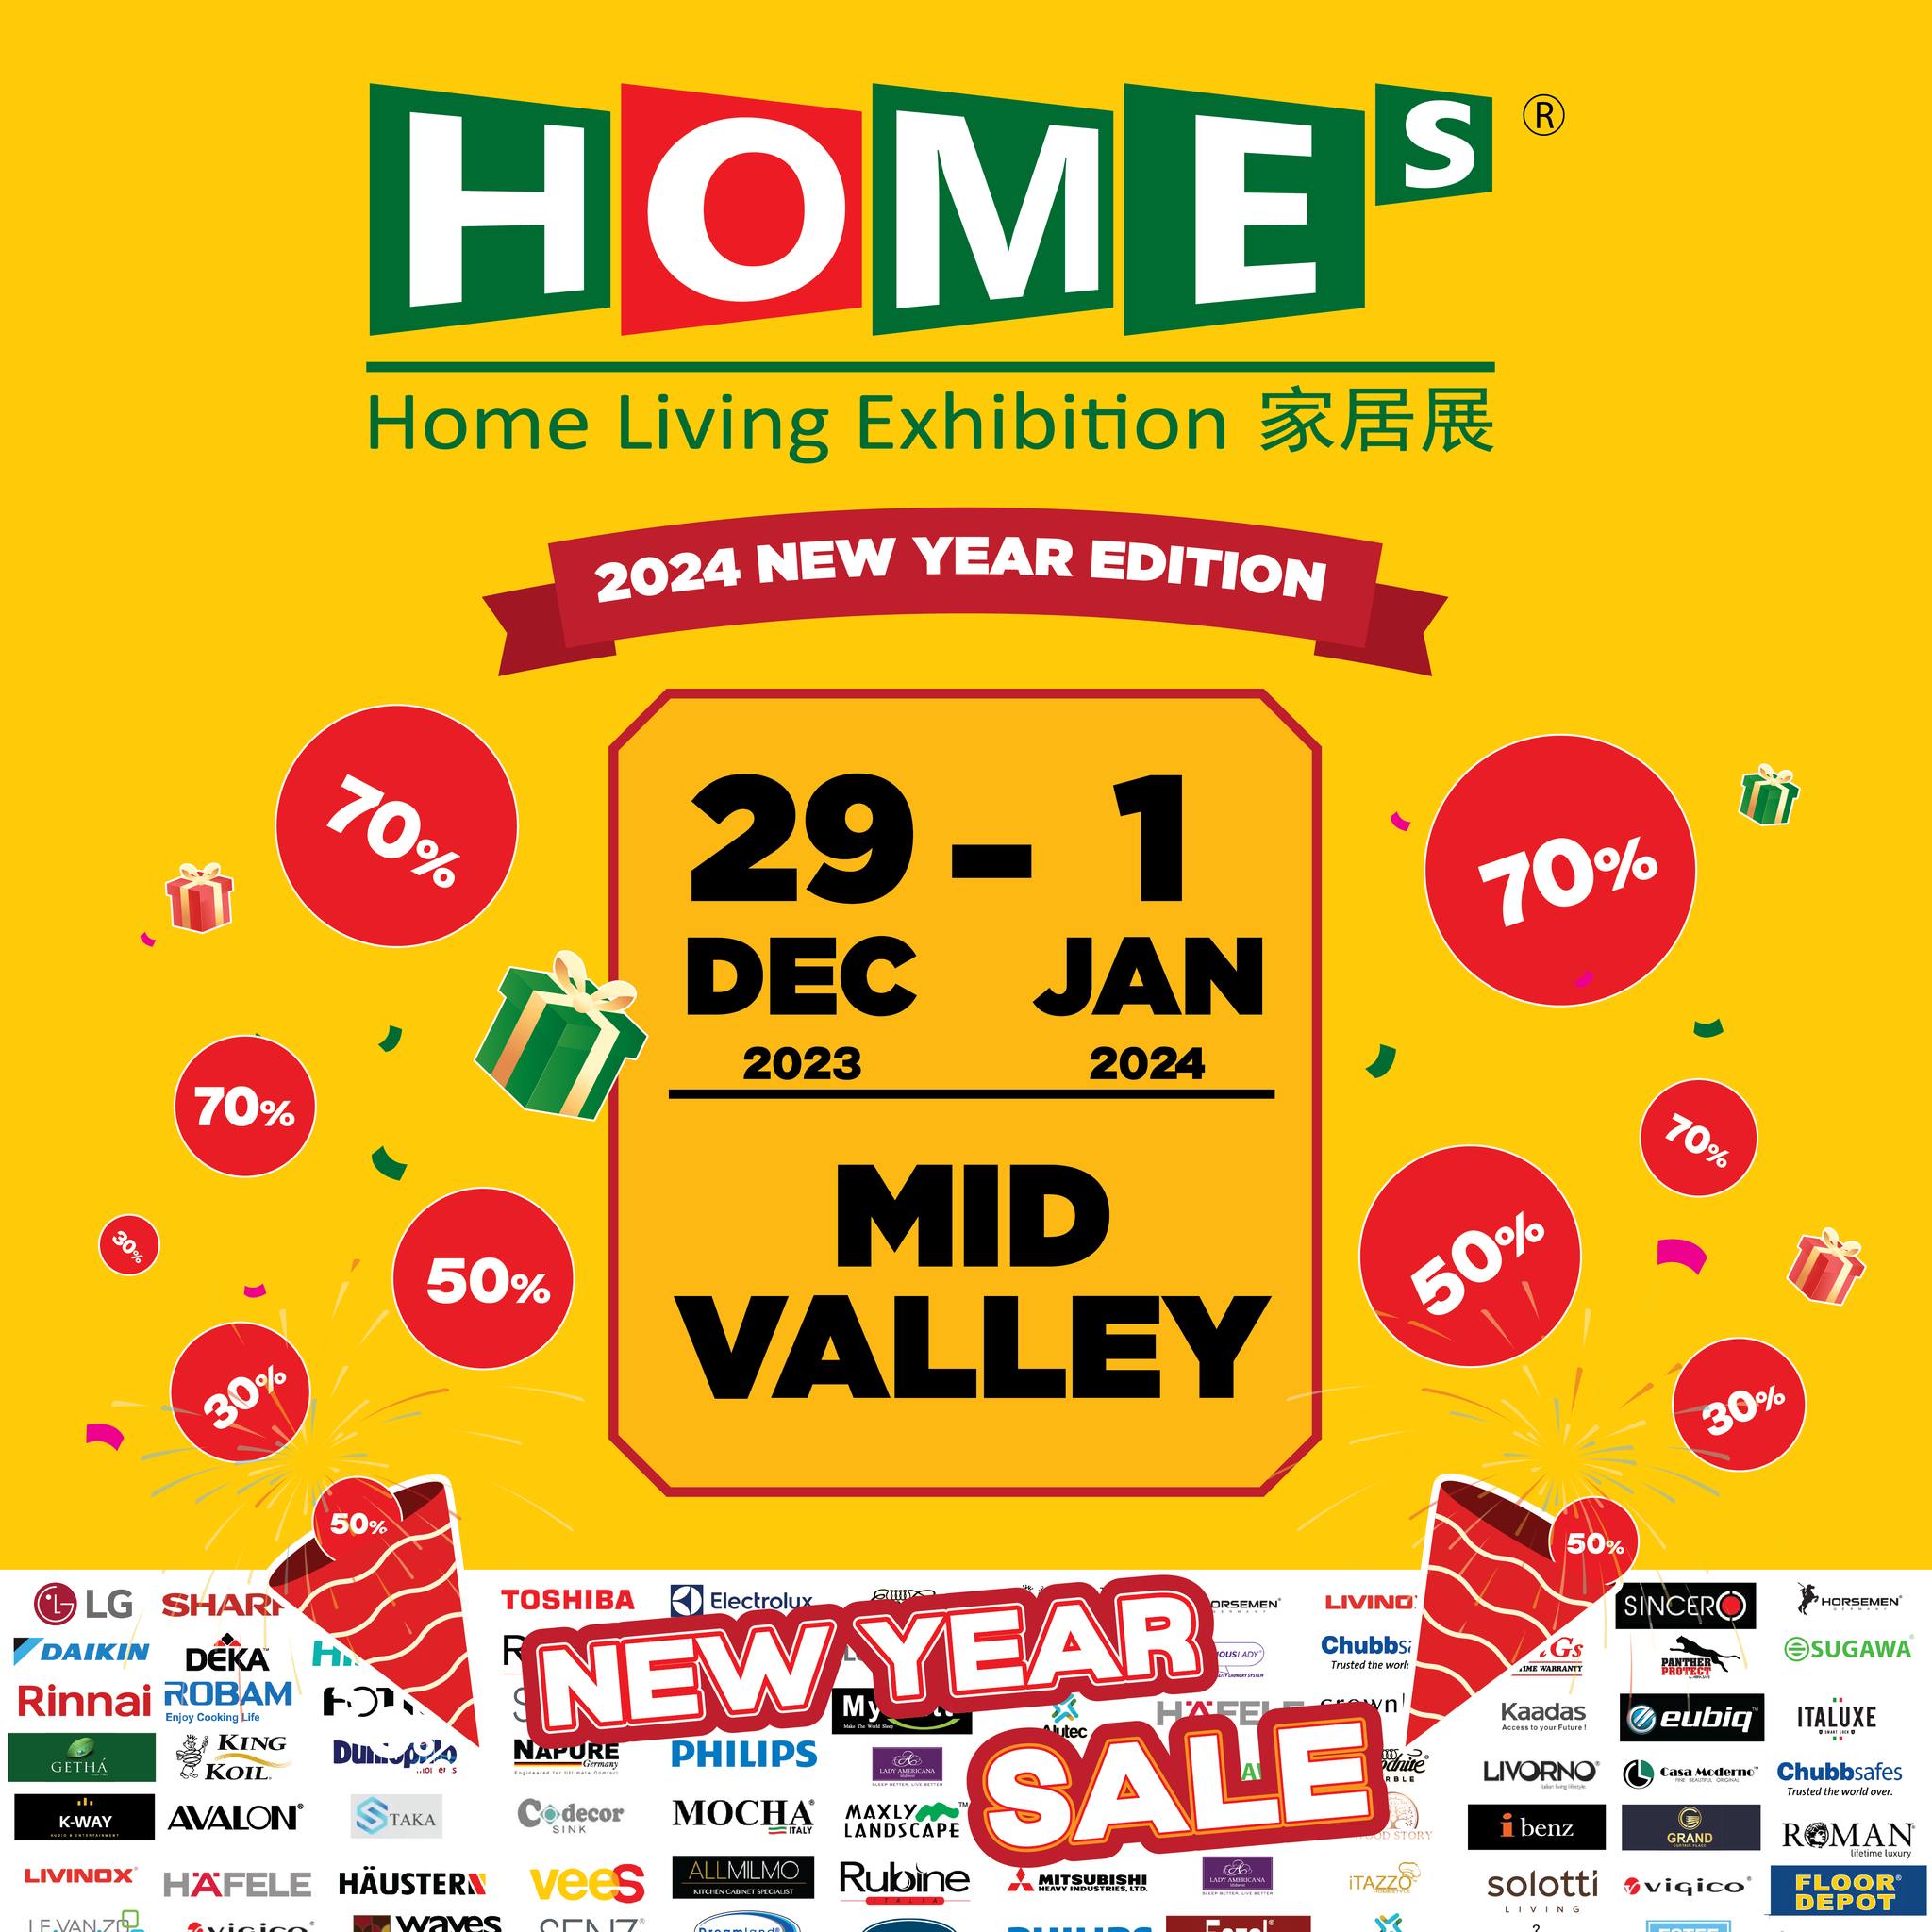 HOMEs - Home Living Exhibition, Online Event